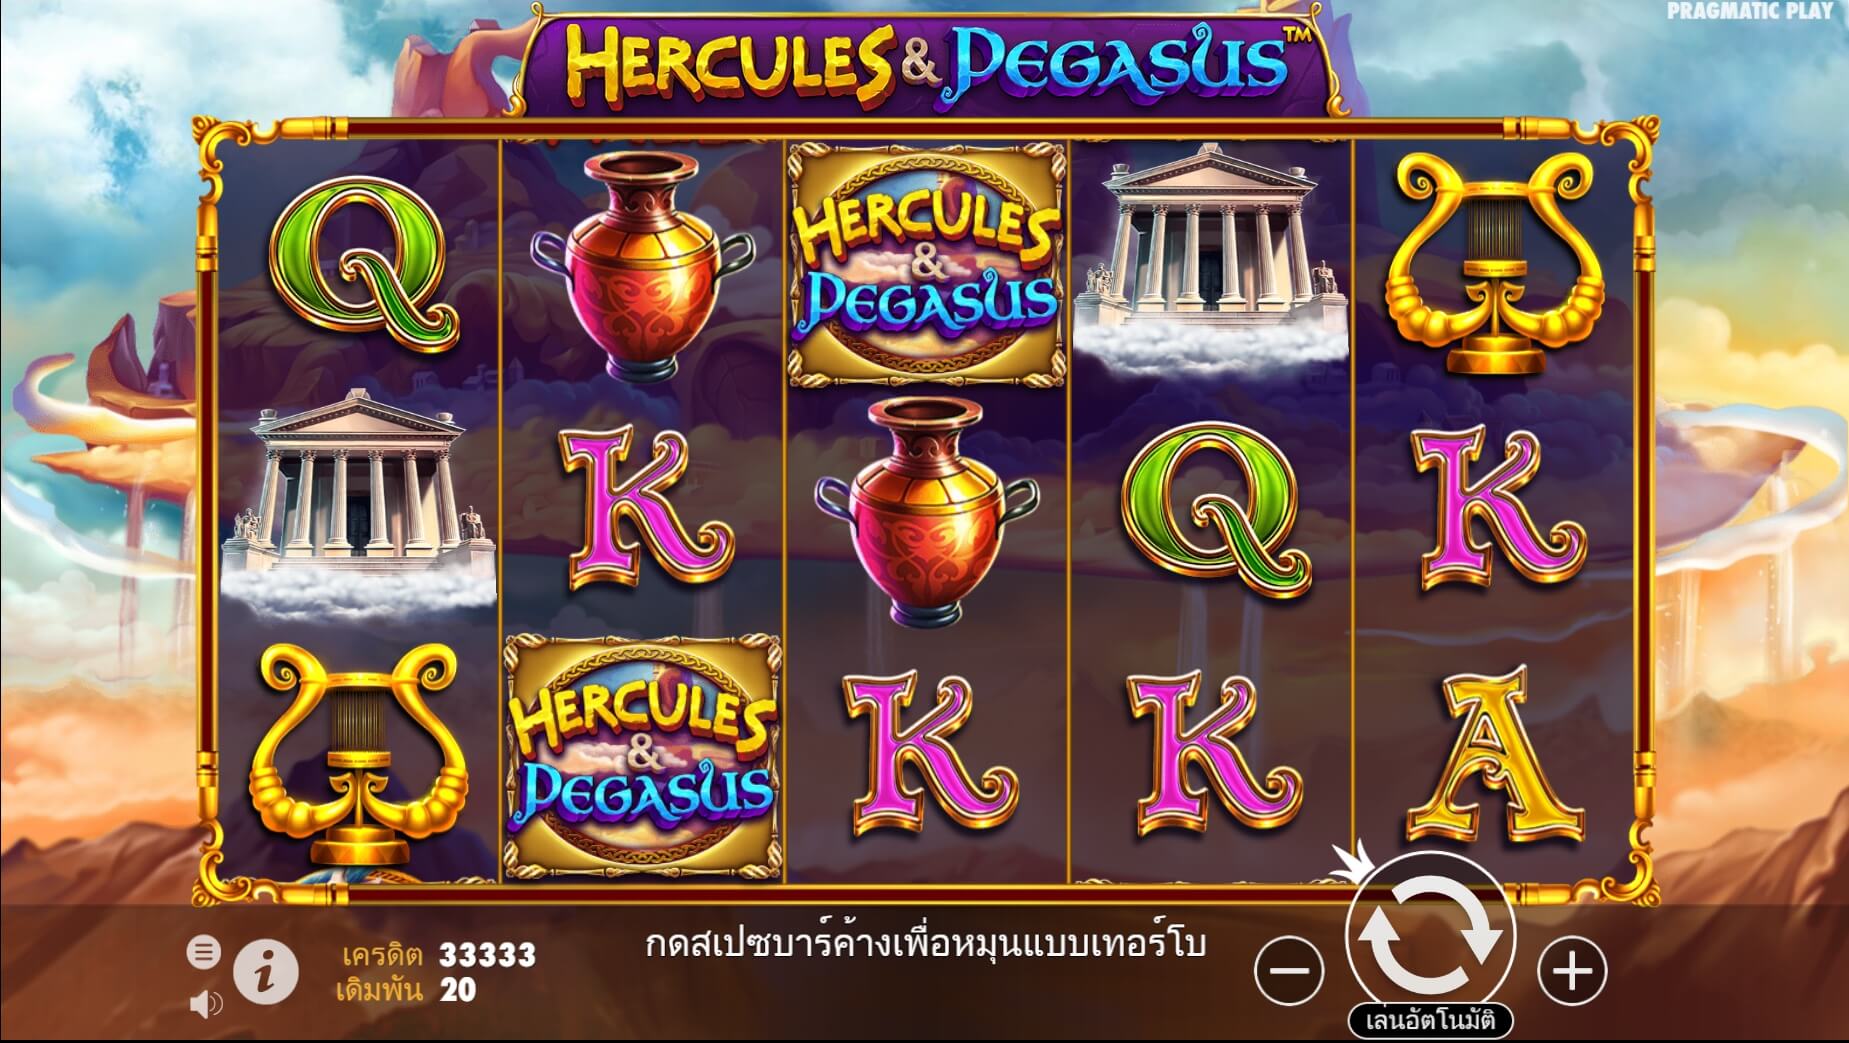 Hercules and Pegasus ฟรีเครดิต Caishen’s Gold เครดิตฟรี 300